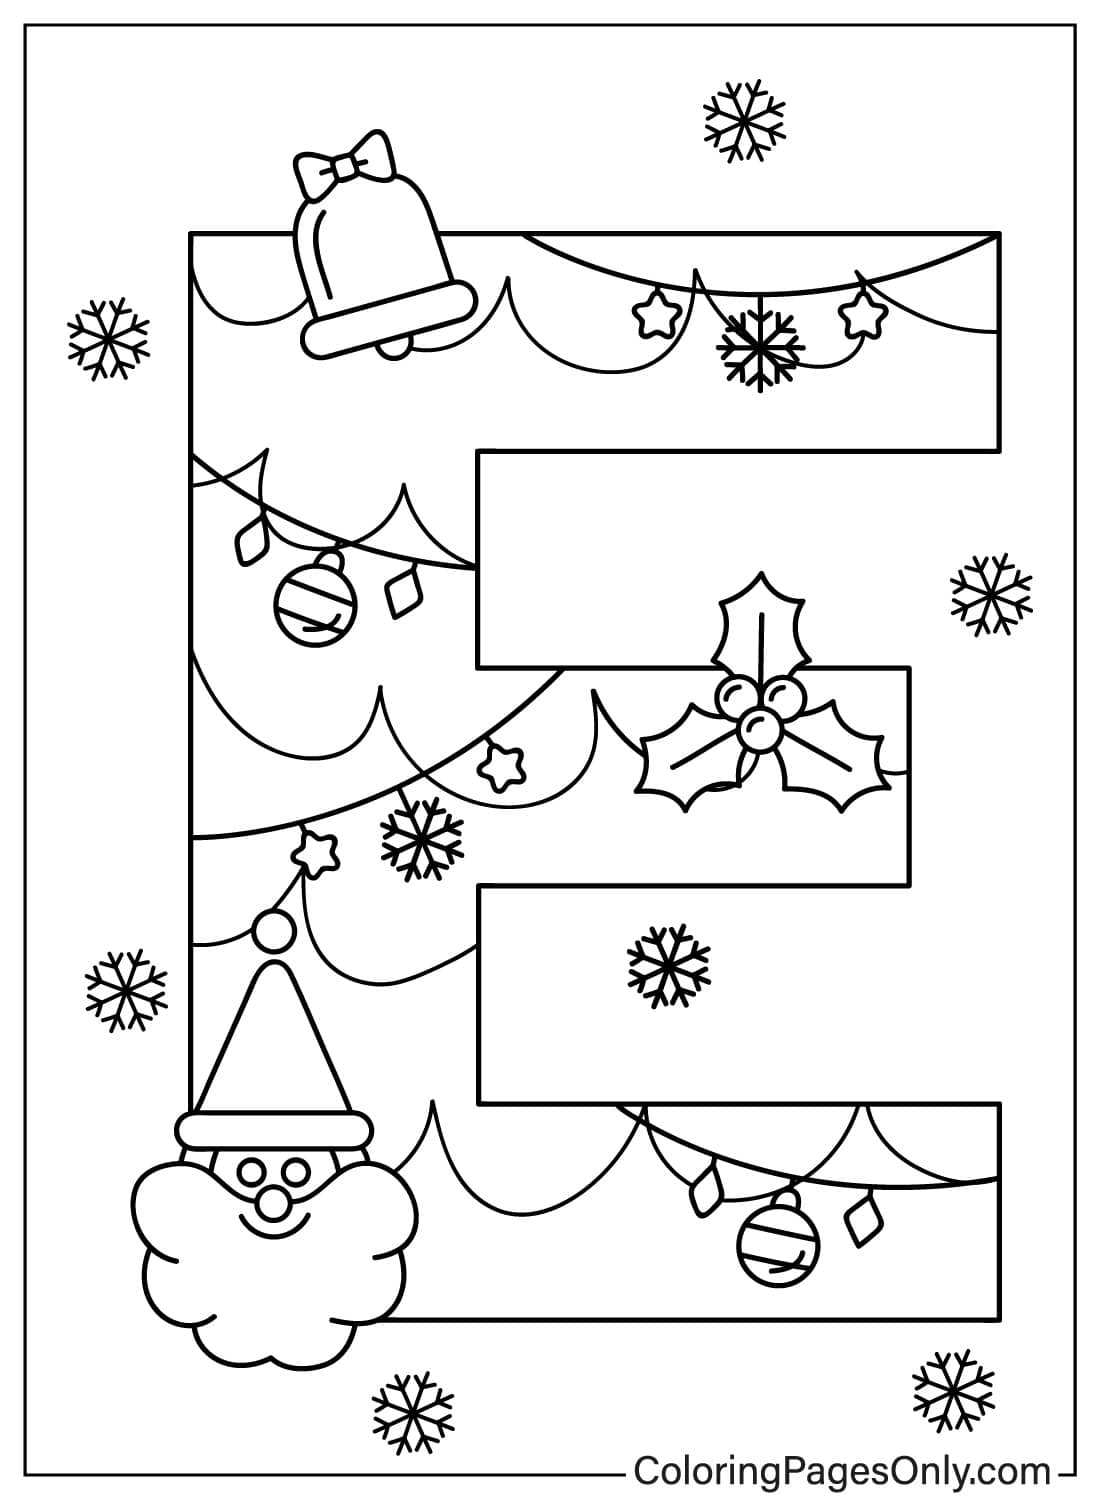 E Alphabet Font Cute Merry Christmas - Free Printable Coloring Pages